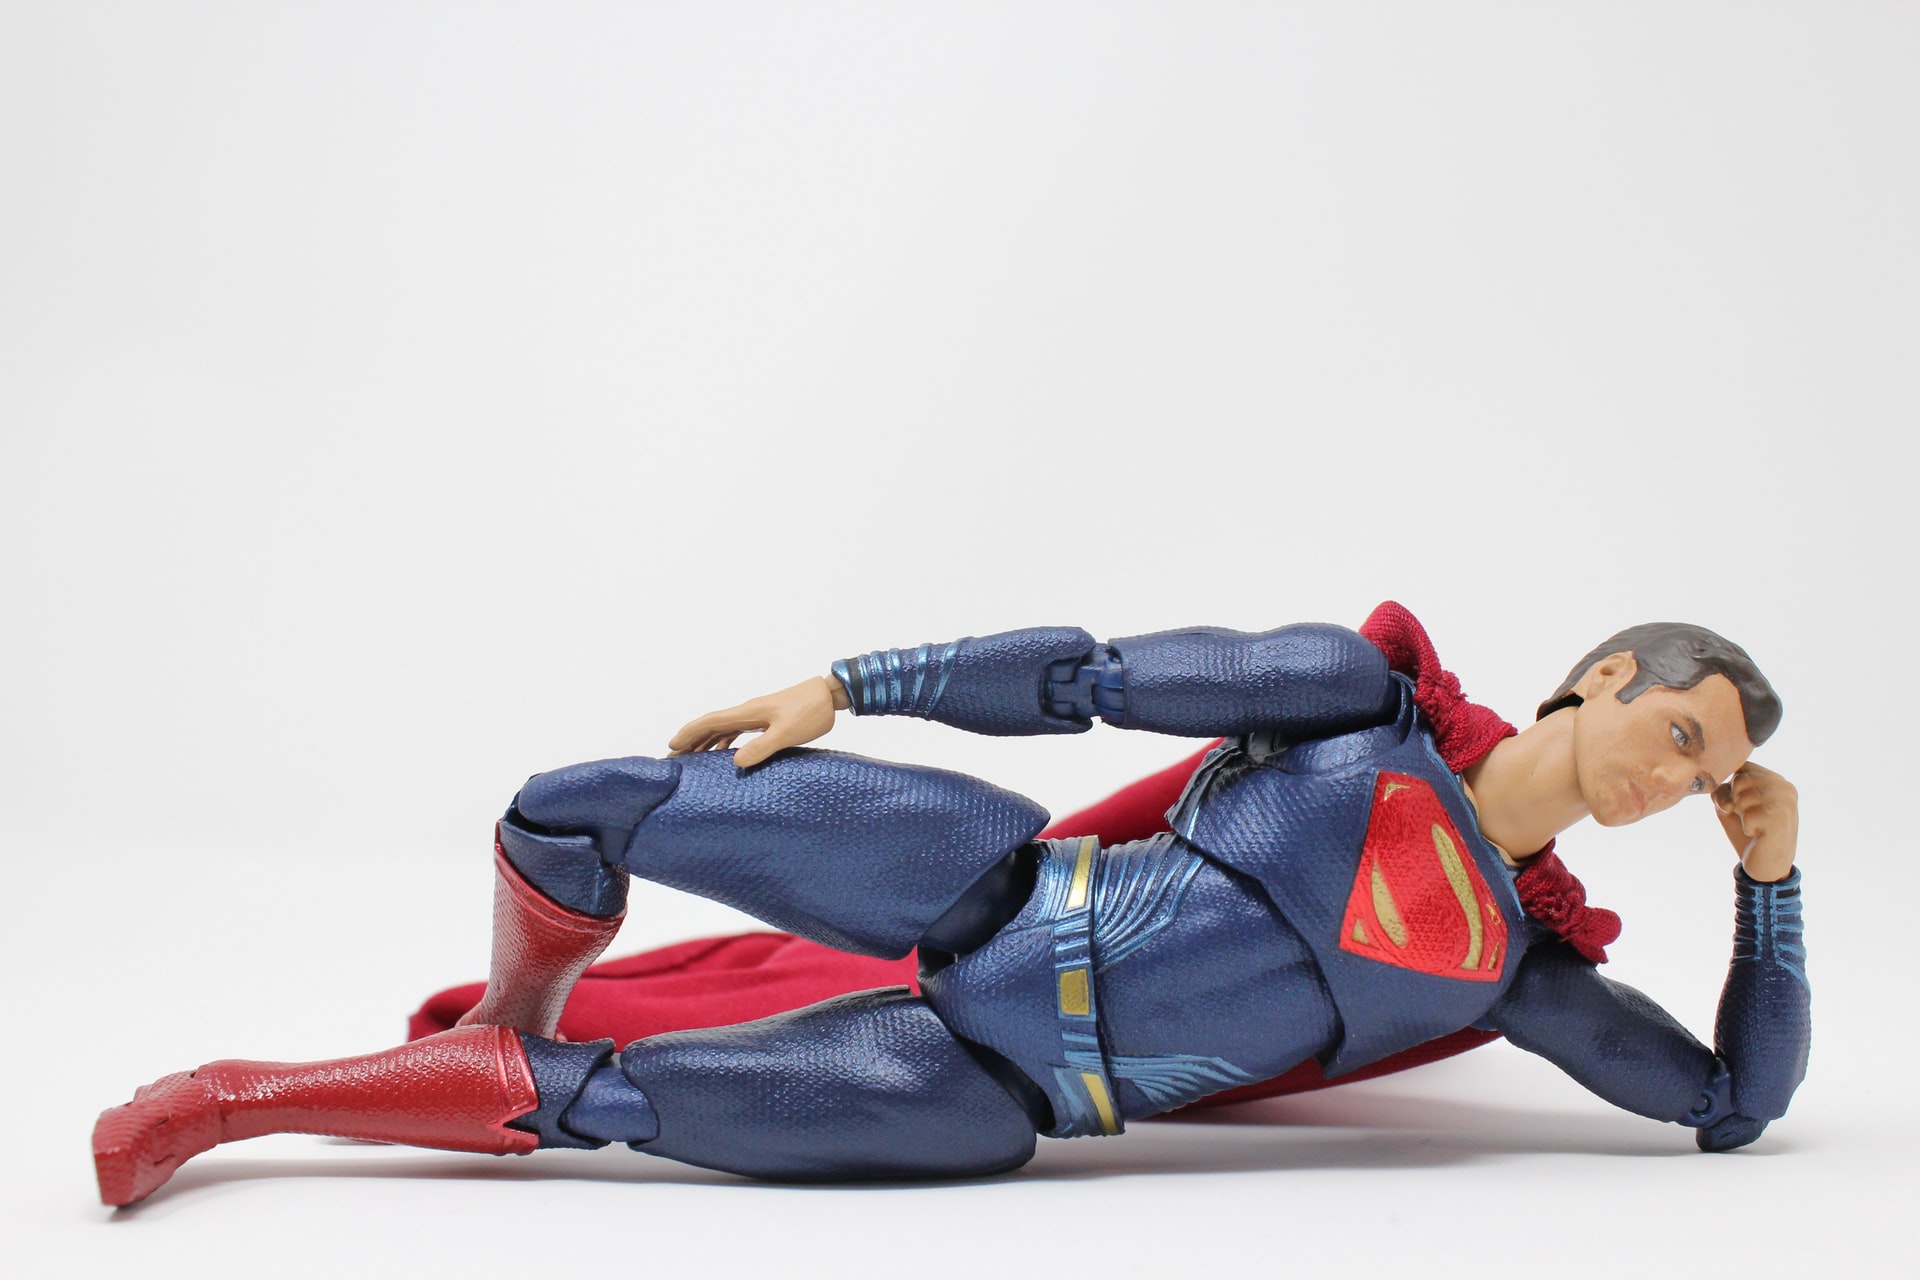 A photo of a Superman figure lying down against a white background.